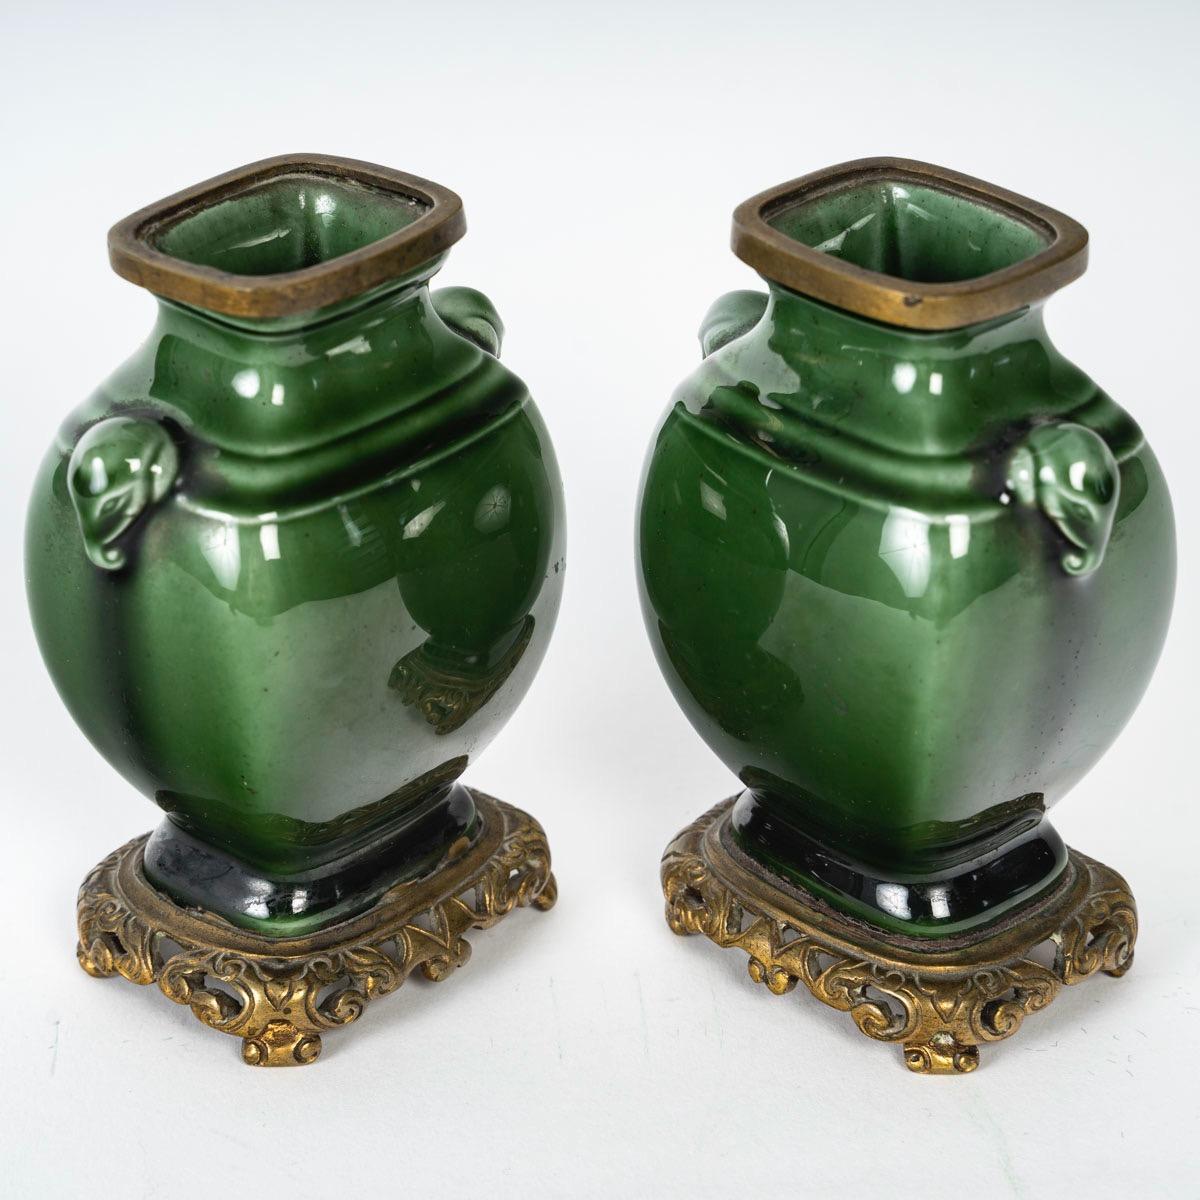 Chinoiserie Théodore Deck (1823-1891), Miniature Pair of Faience Vases circa 1870 For Sale